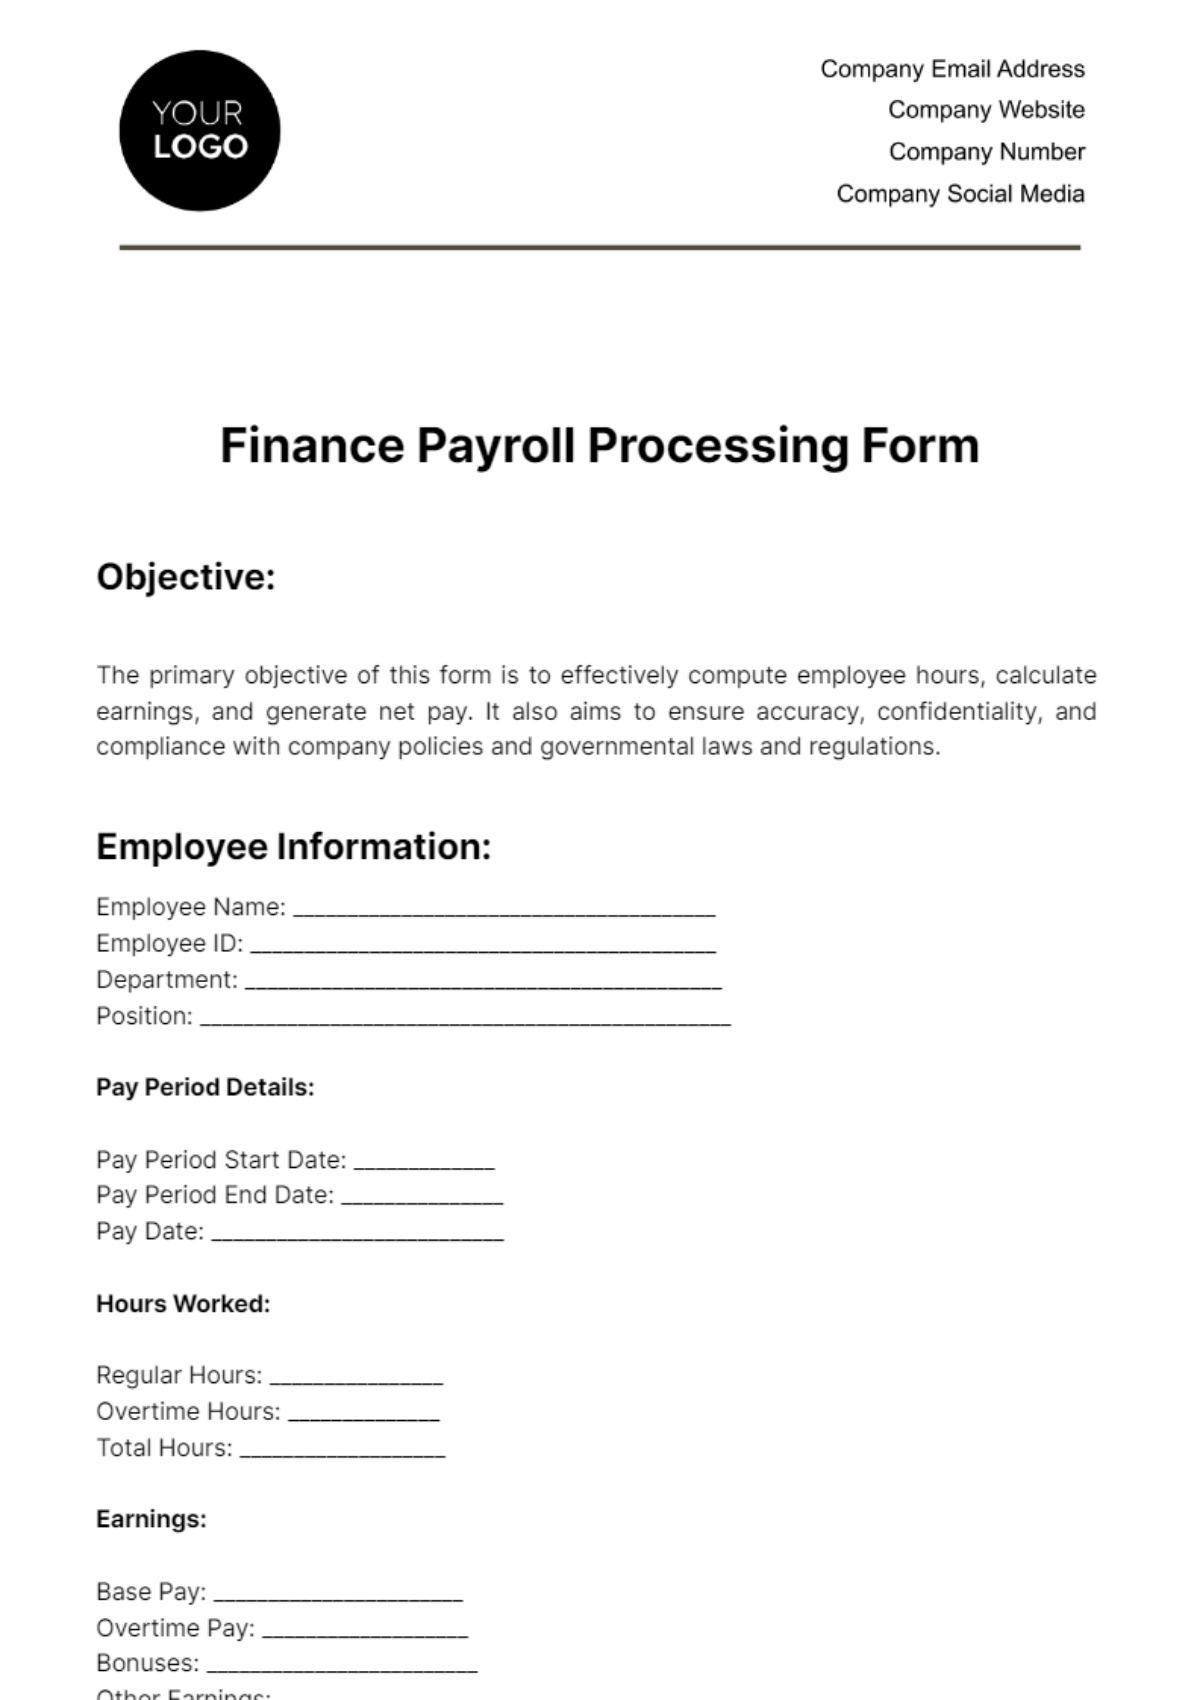 Finance Payroll Processing Form Template